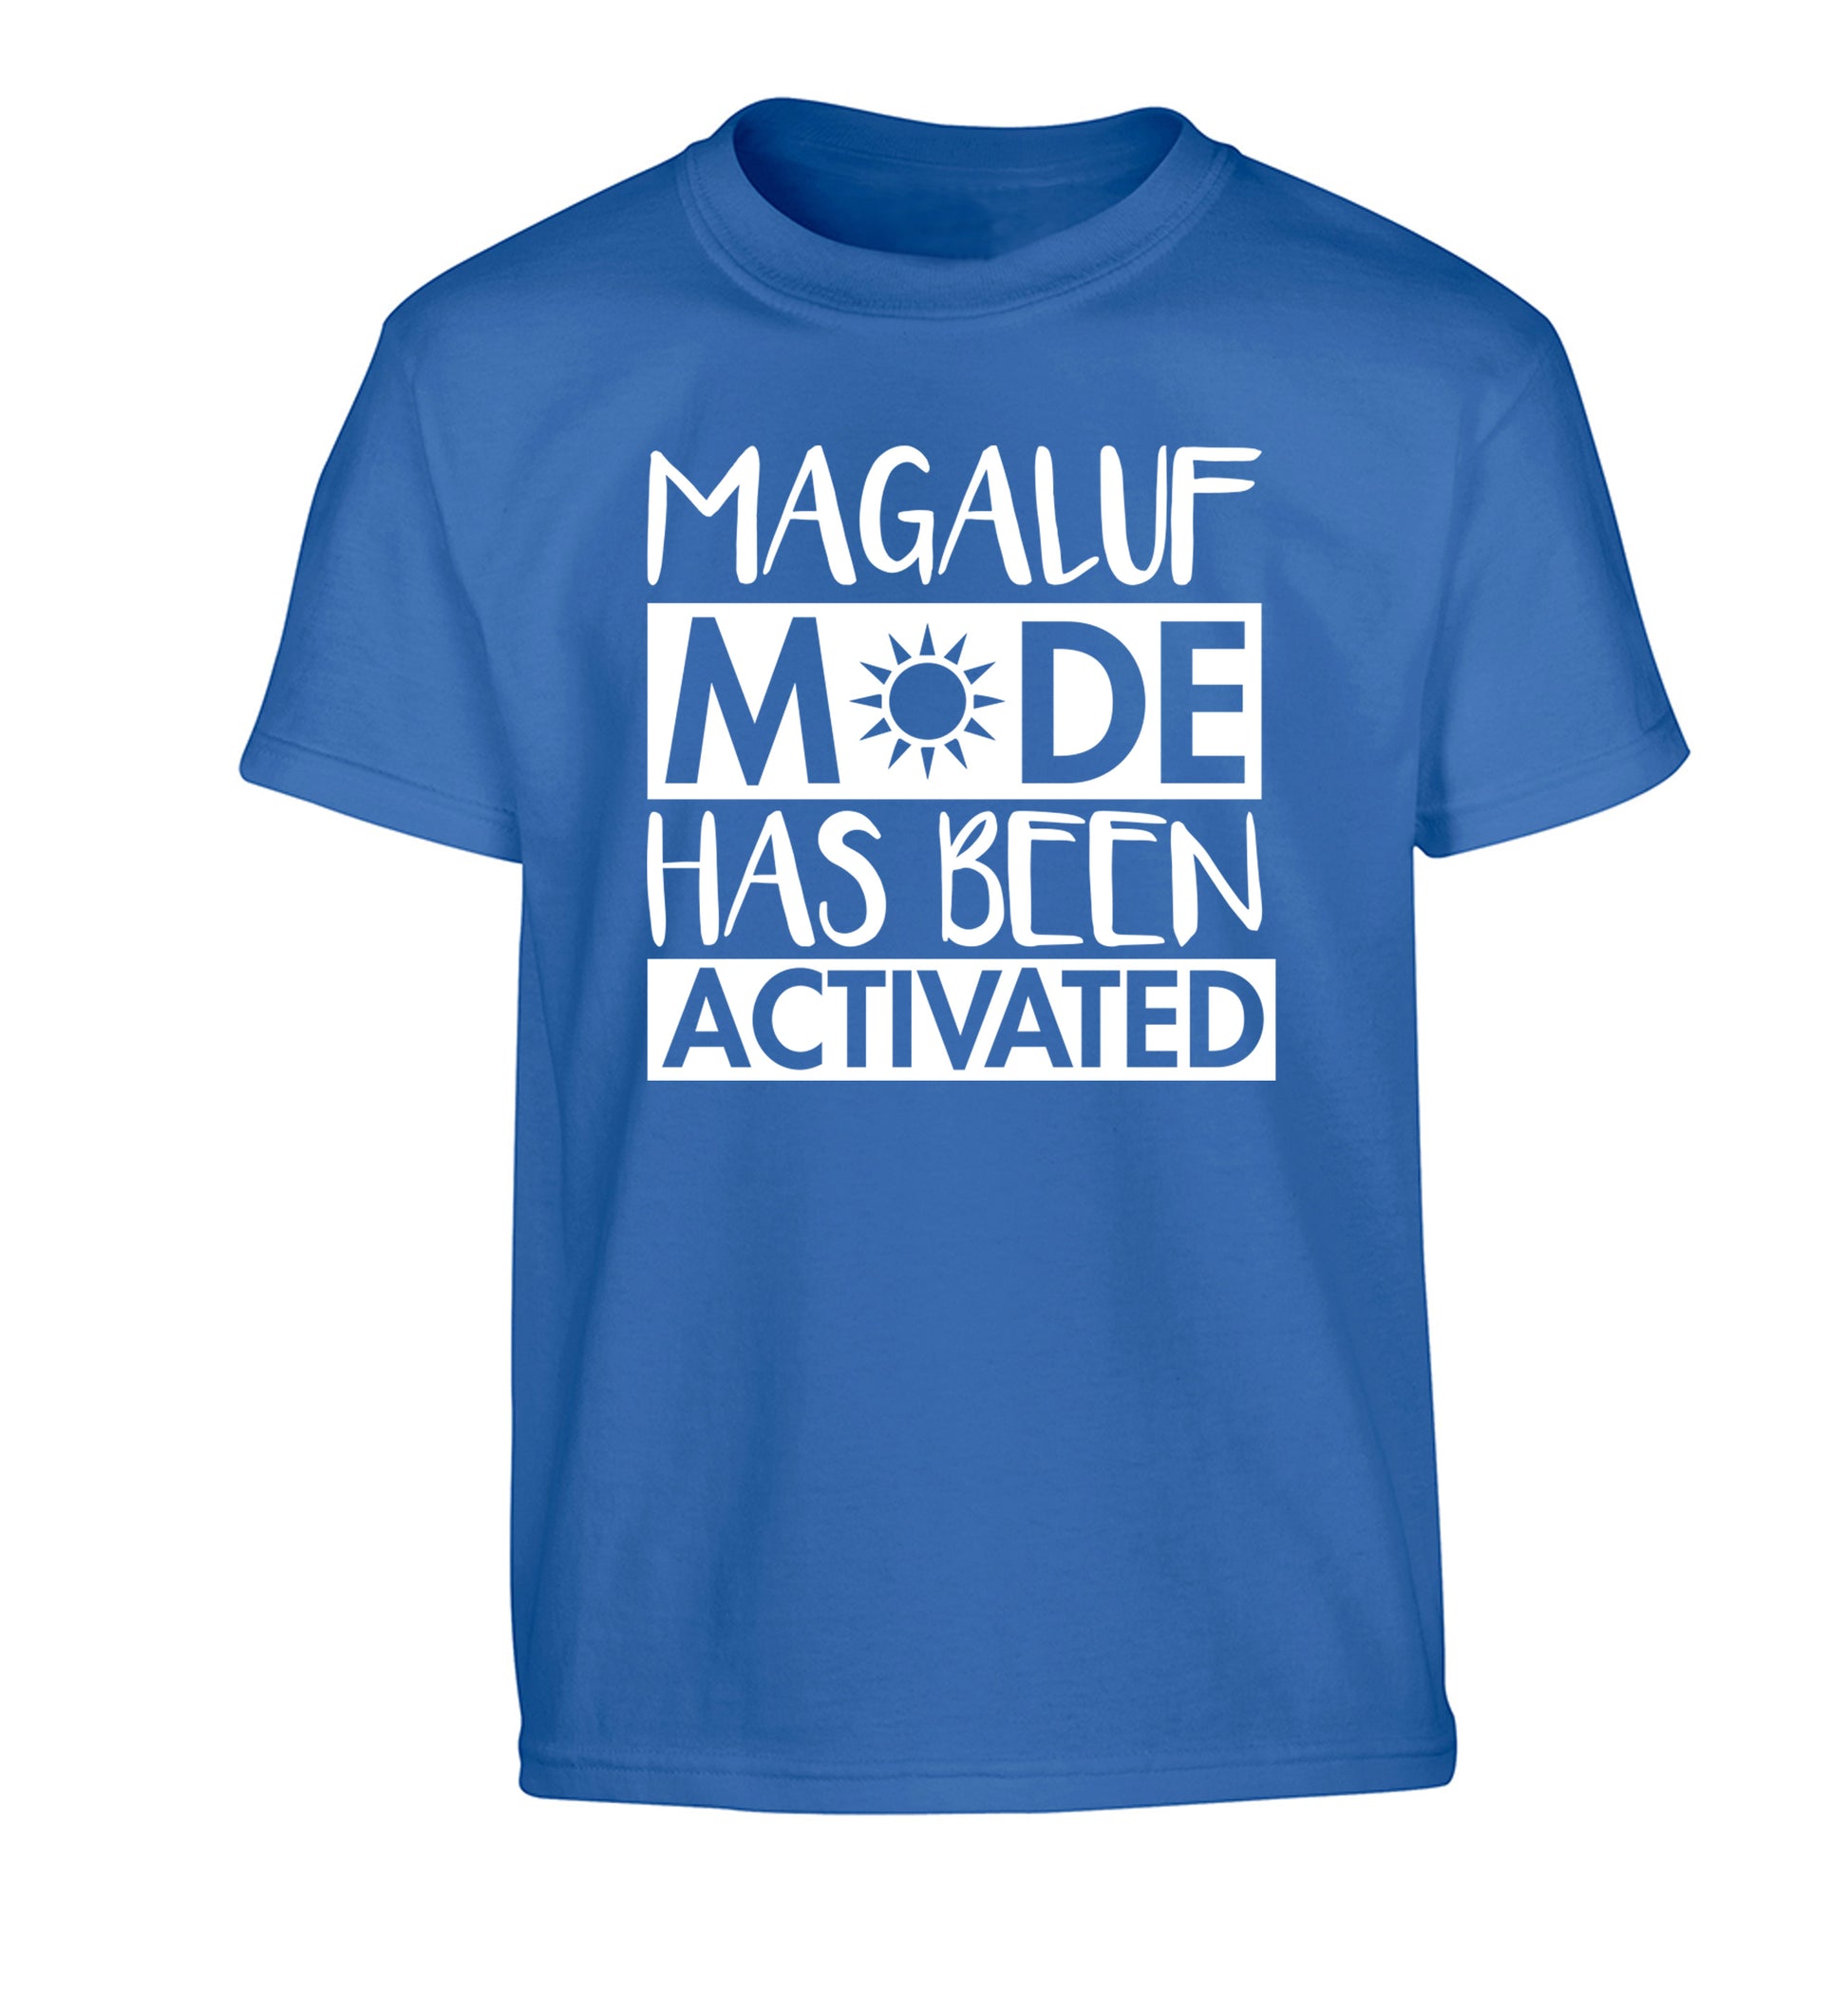 Magaluf mode has been activated Children's blue Tshirt 12-13 Years